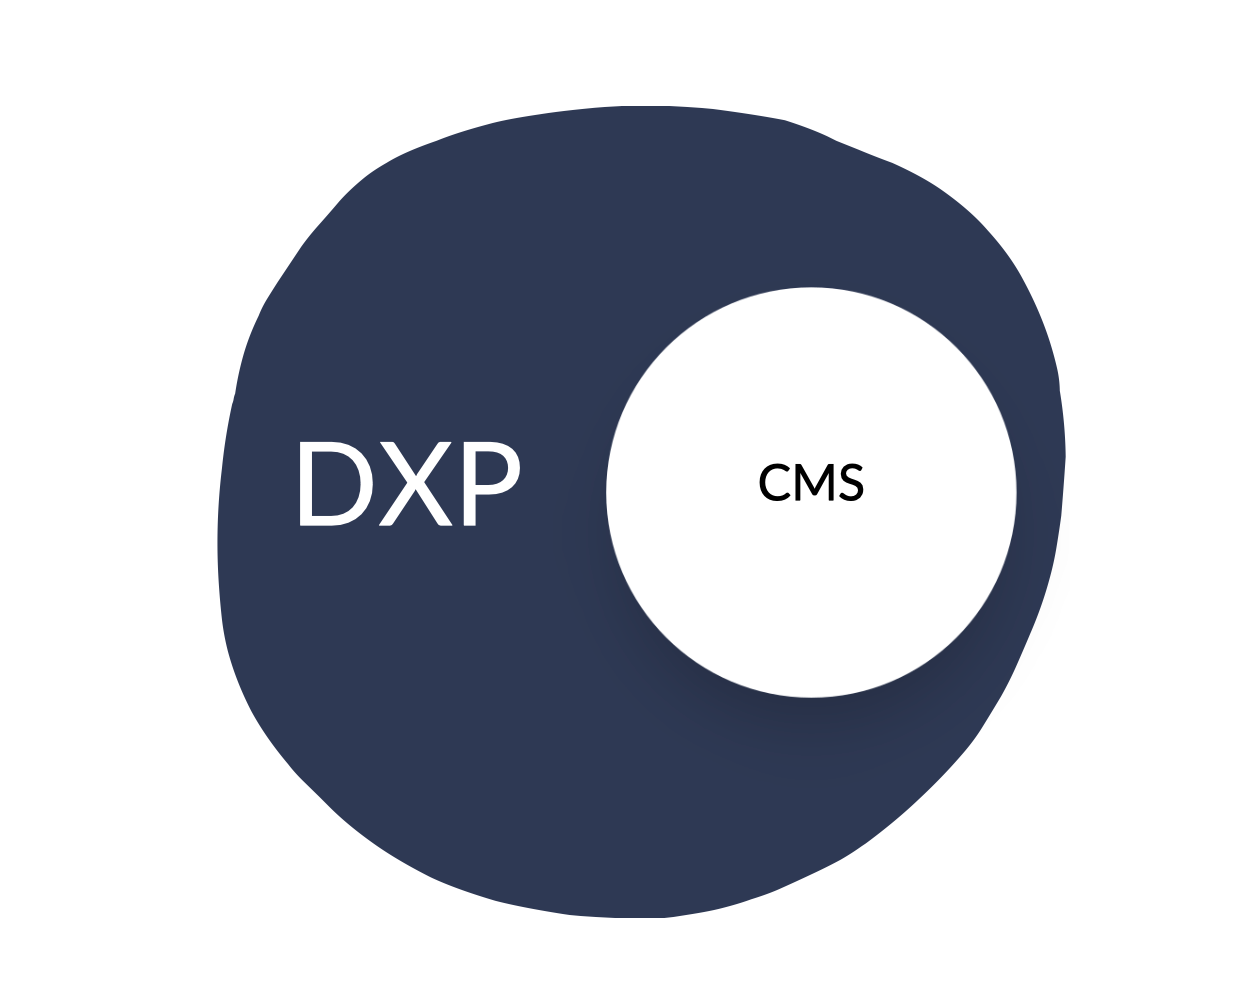 Simple illustration showing the overlap and difference in meaning between DXP and CMS